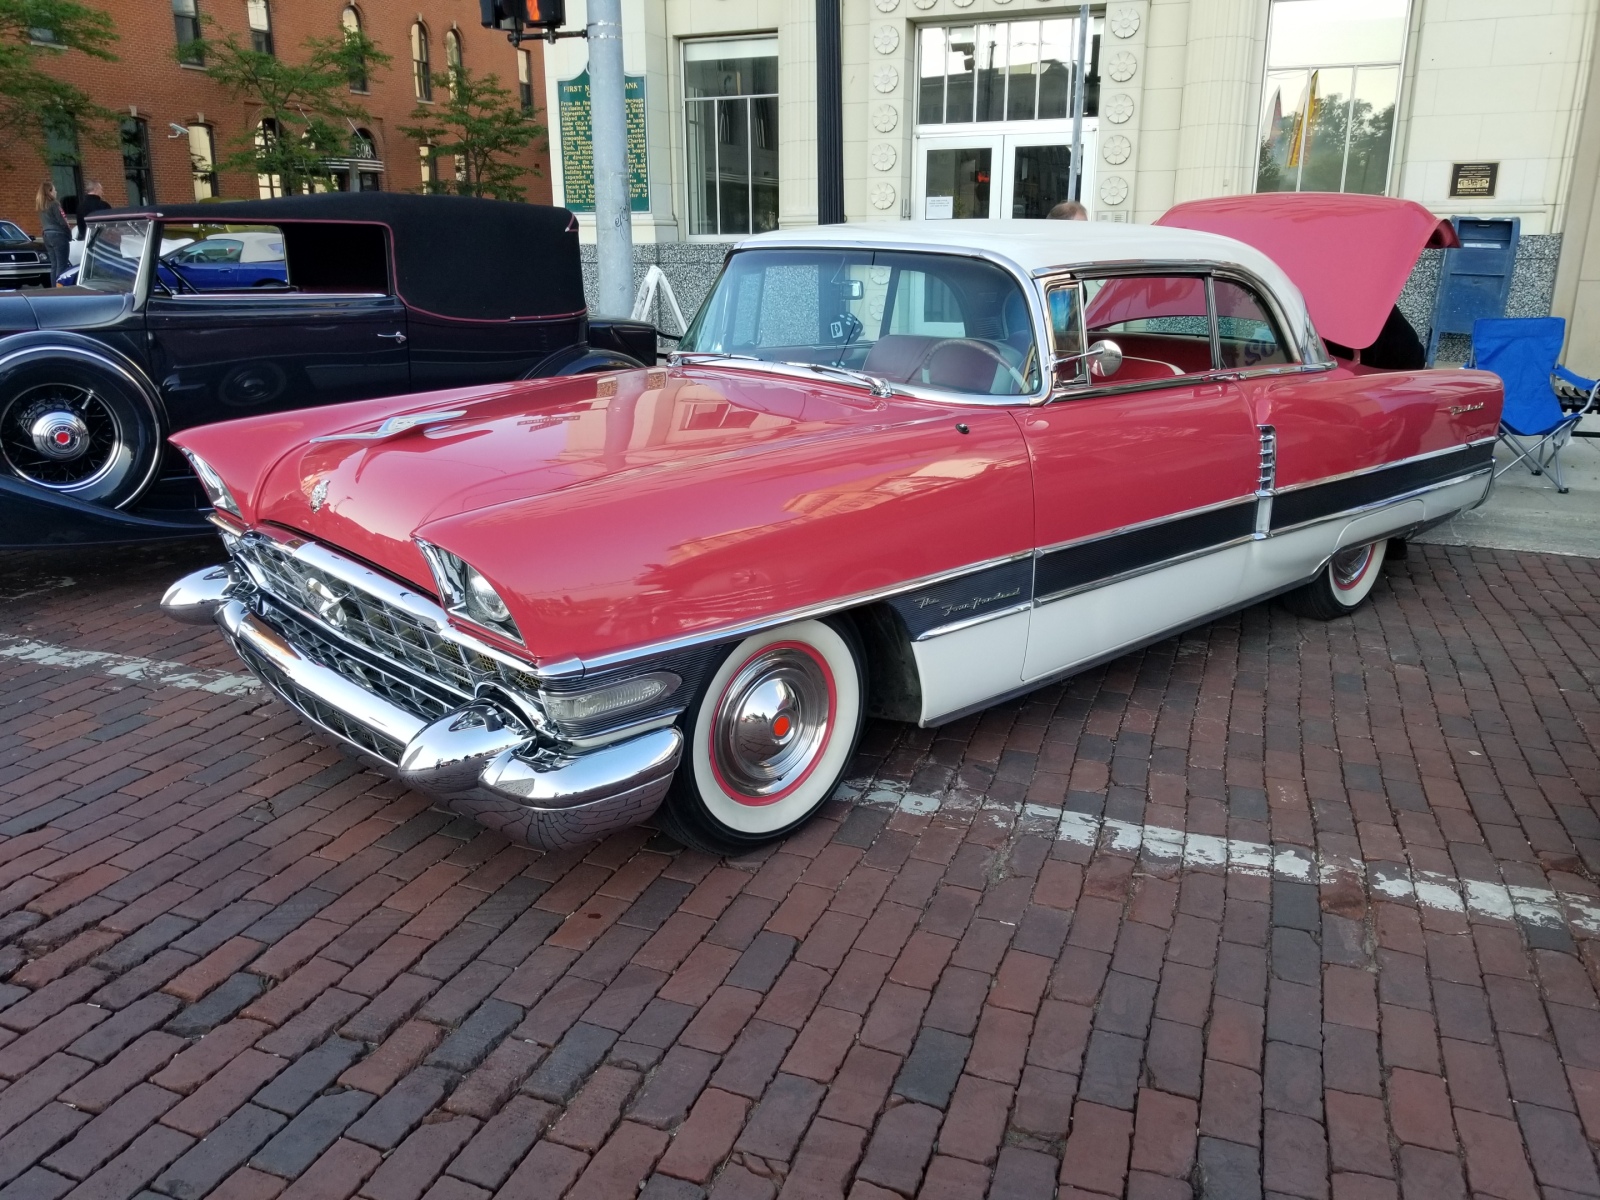 01-1956-Packard-400-hardtop-Scottish-heather-bought-last-year-from-Texas-by-Tom-Upton-of-Ann-Arbor